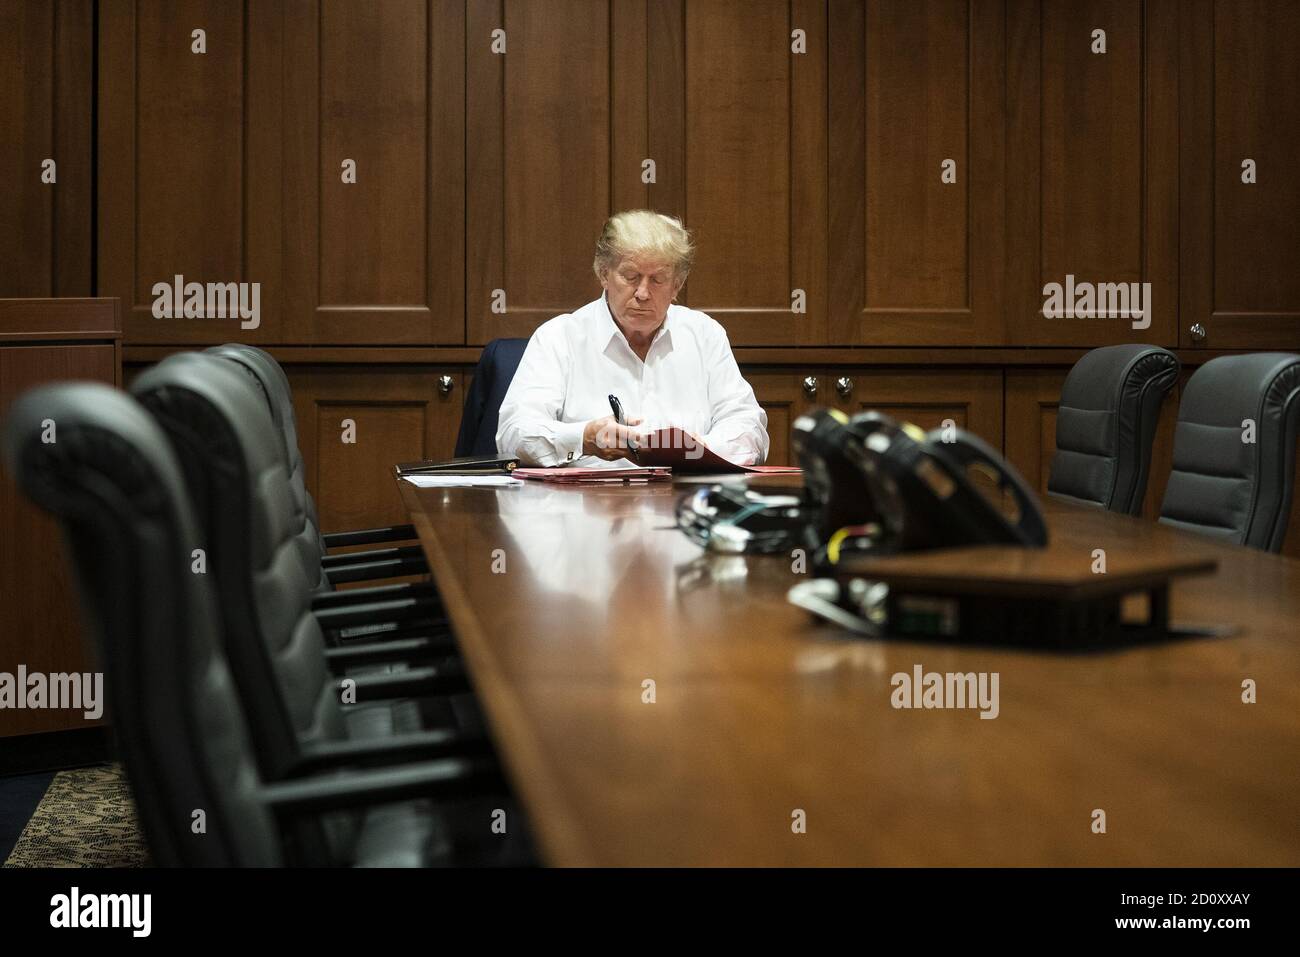 Bethesda, United States Of America. 03rd Oct, 2020. President Donald J. Trump works in his conference room at Walter Reed National Military Medical Center in Bethesda, Md. Saturday, Oct. 3, 2020, after testing positive for COVID-19 People: President Donald Trump Credit: Storms Media Group/Alamy Live News Stock Photo